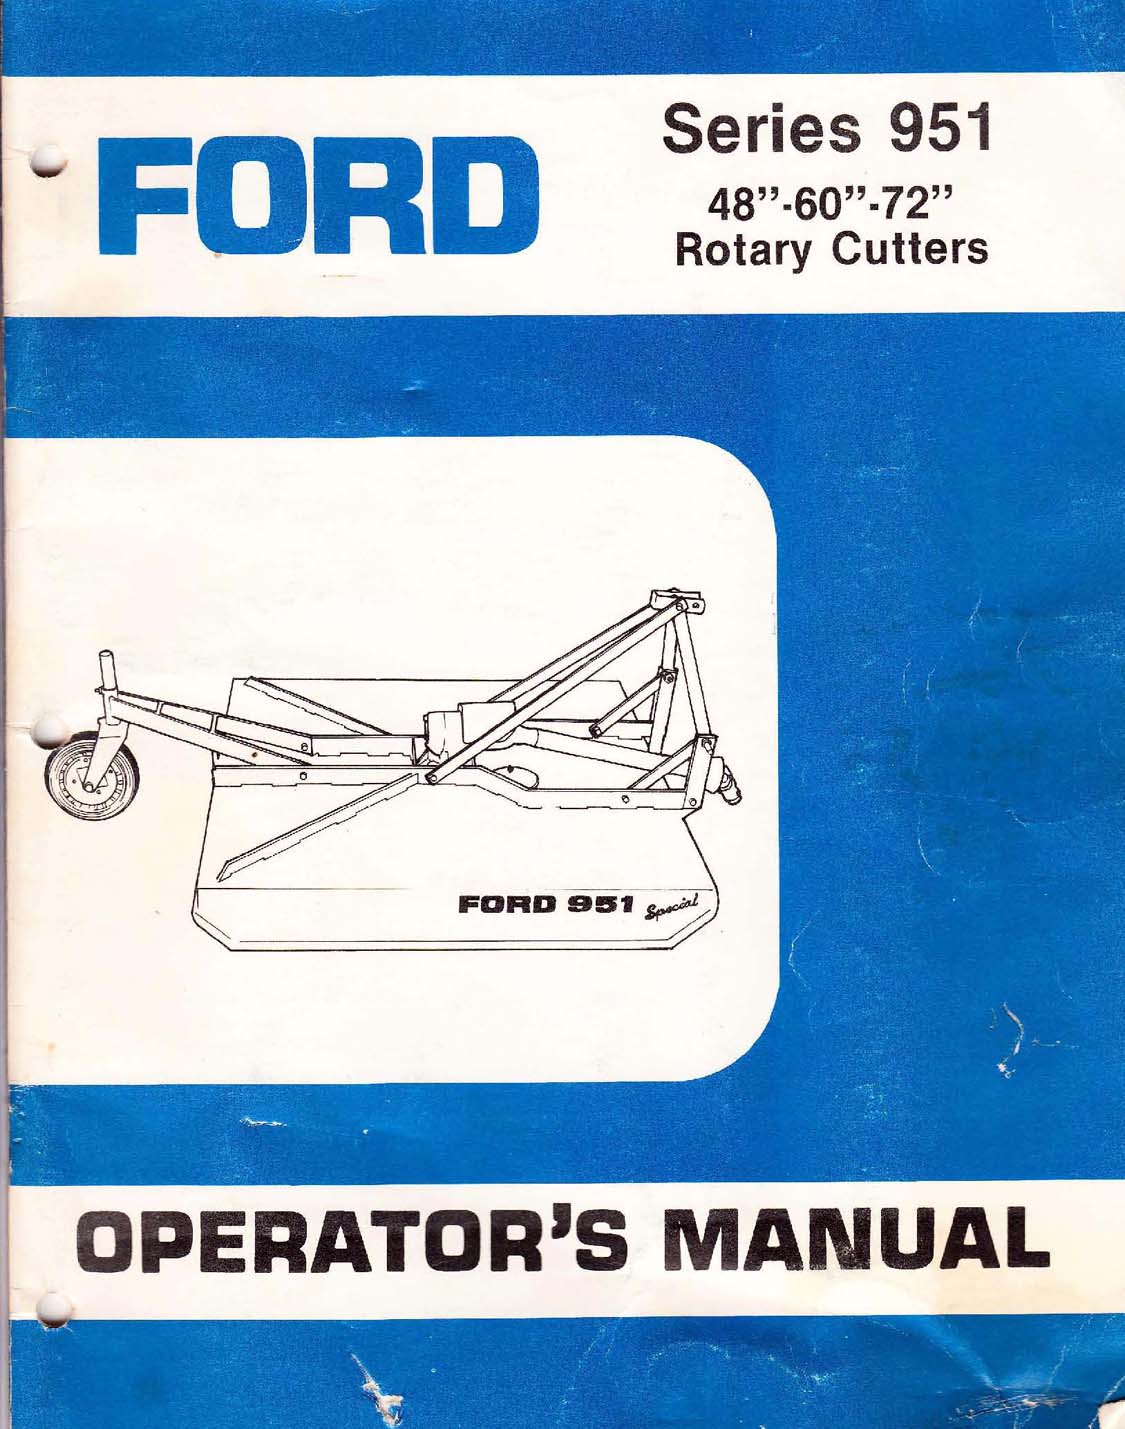 Ford Tractor 906 Rotary Cutter Operator's Manual CHPA 